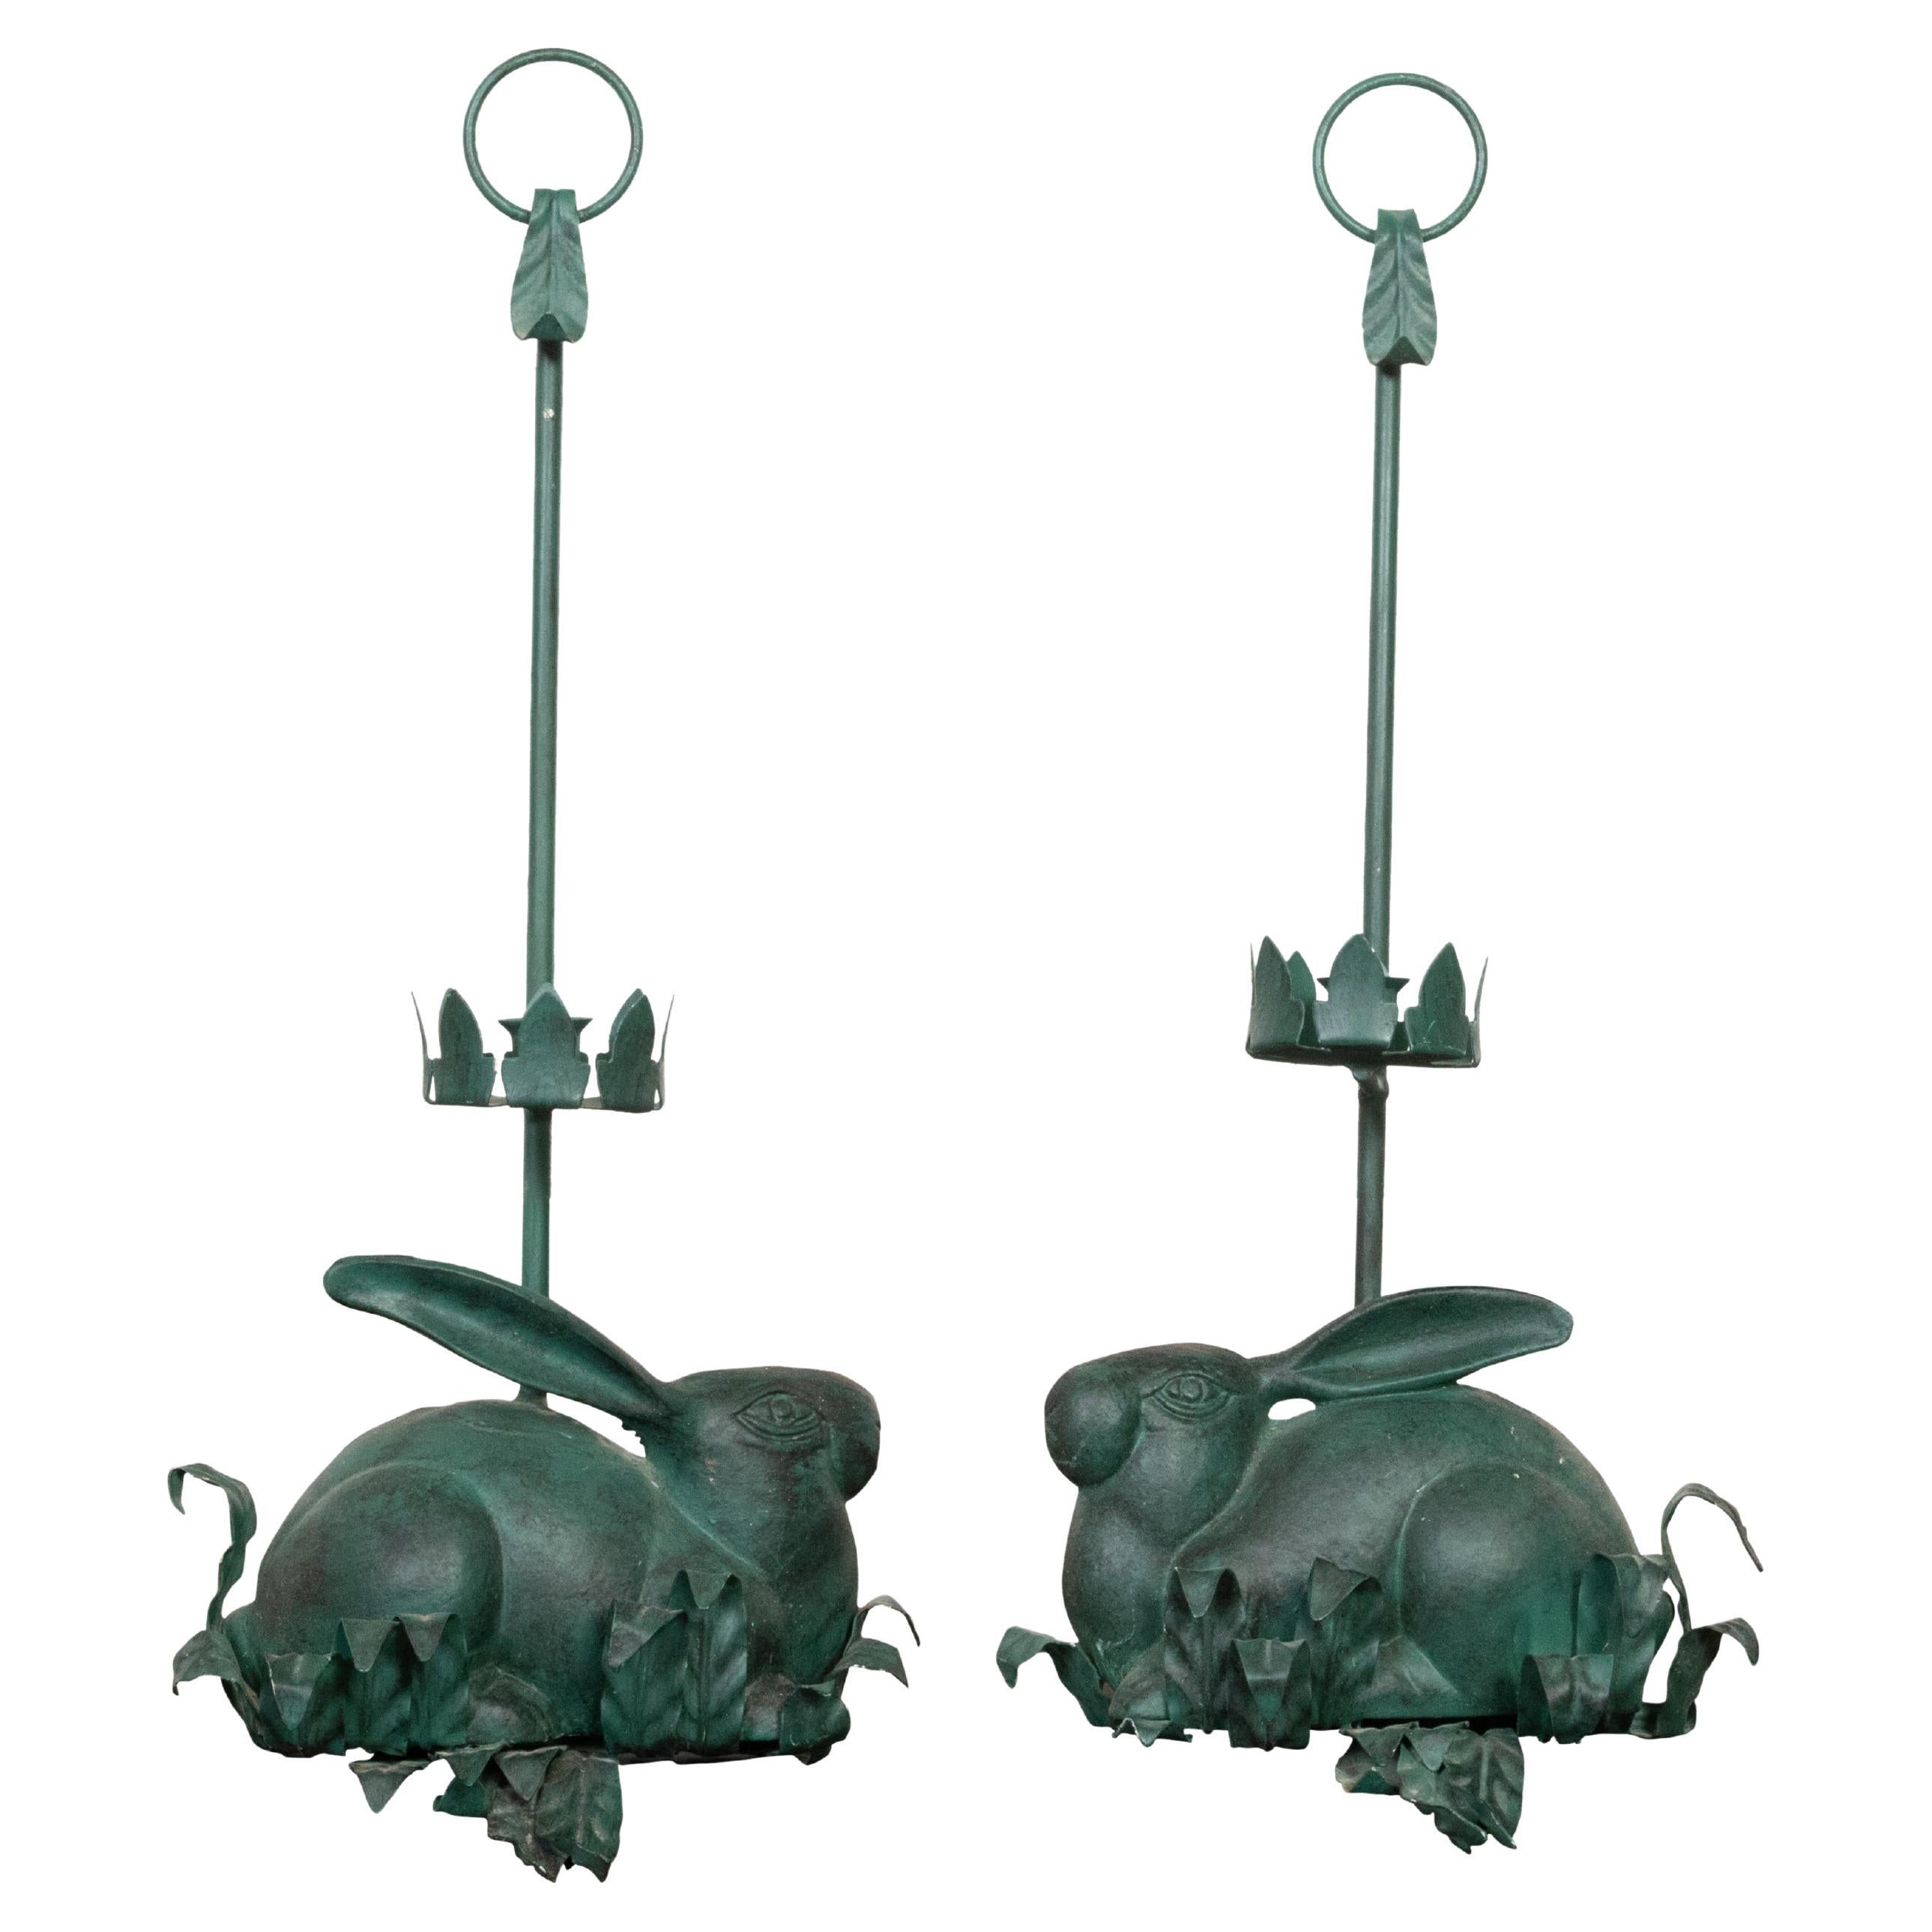 Pair of Vintage American Midcentury Iron Rabbit Candle Holders with Green Patina For Sale